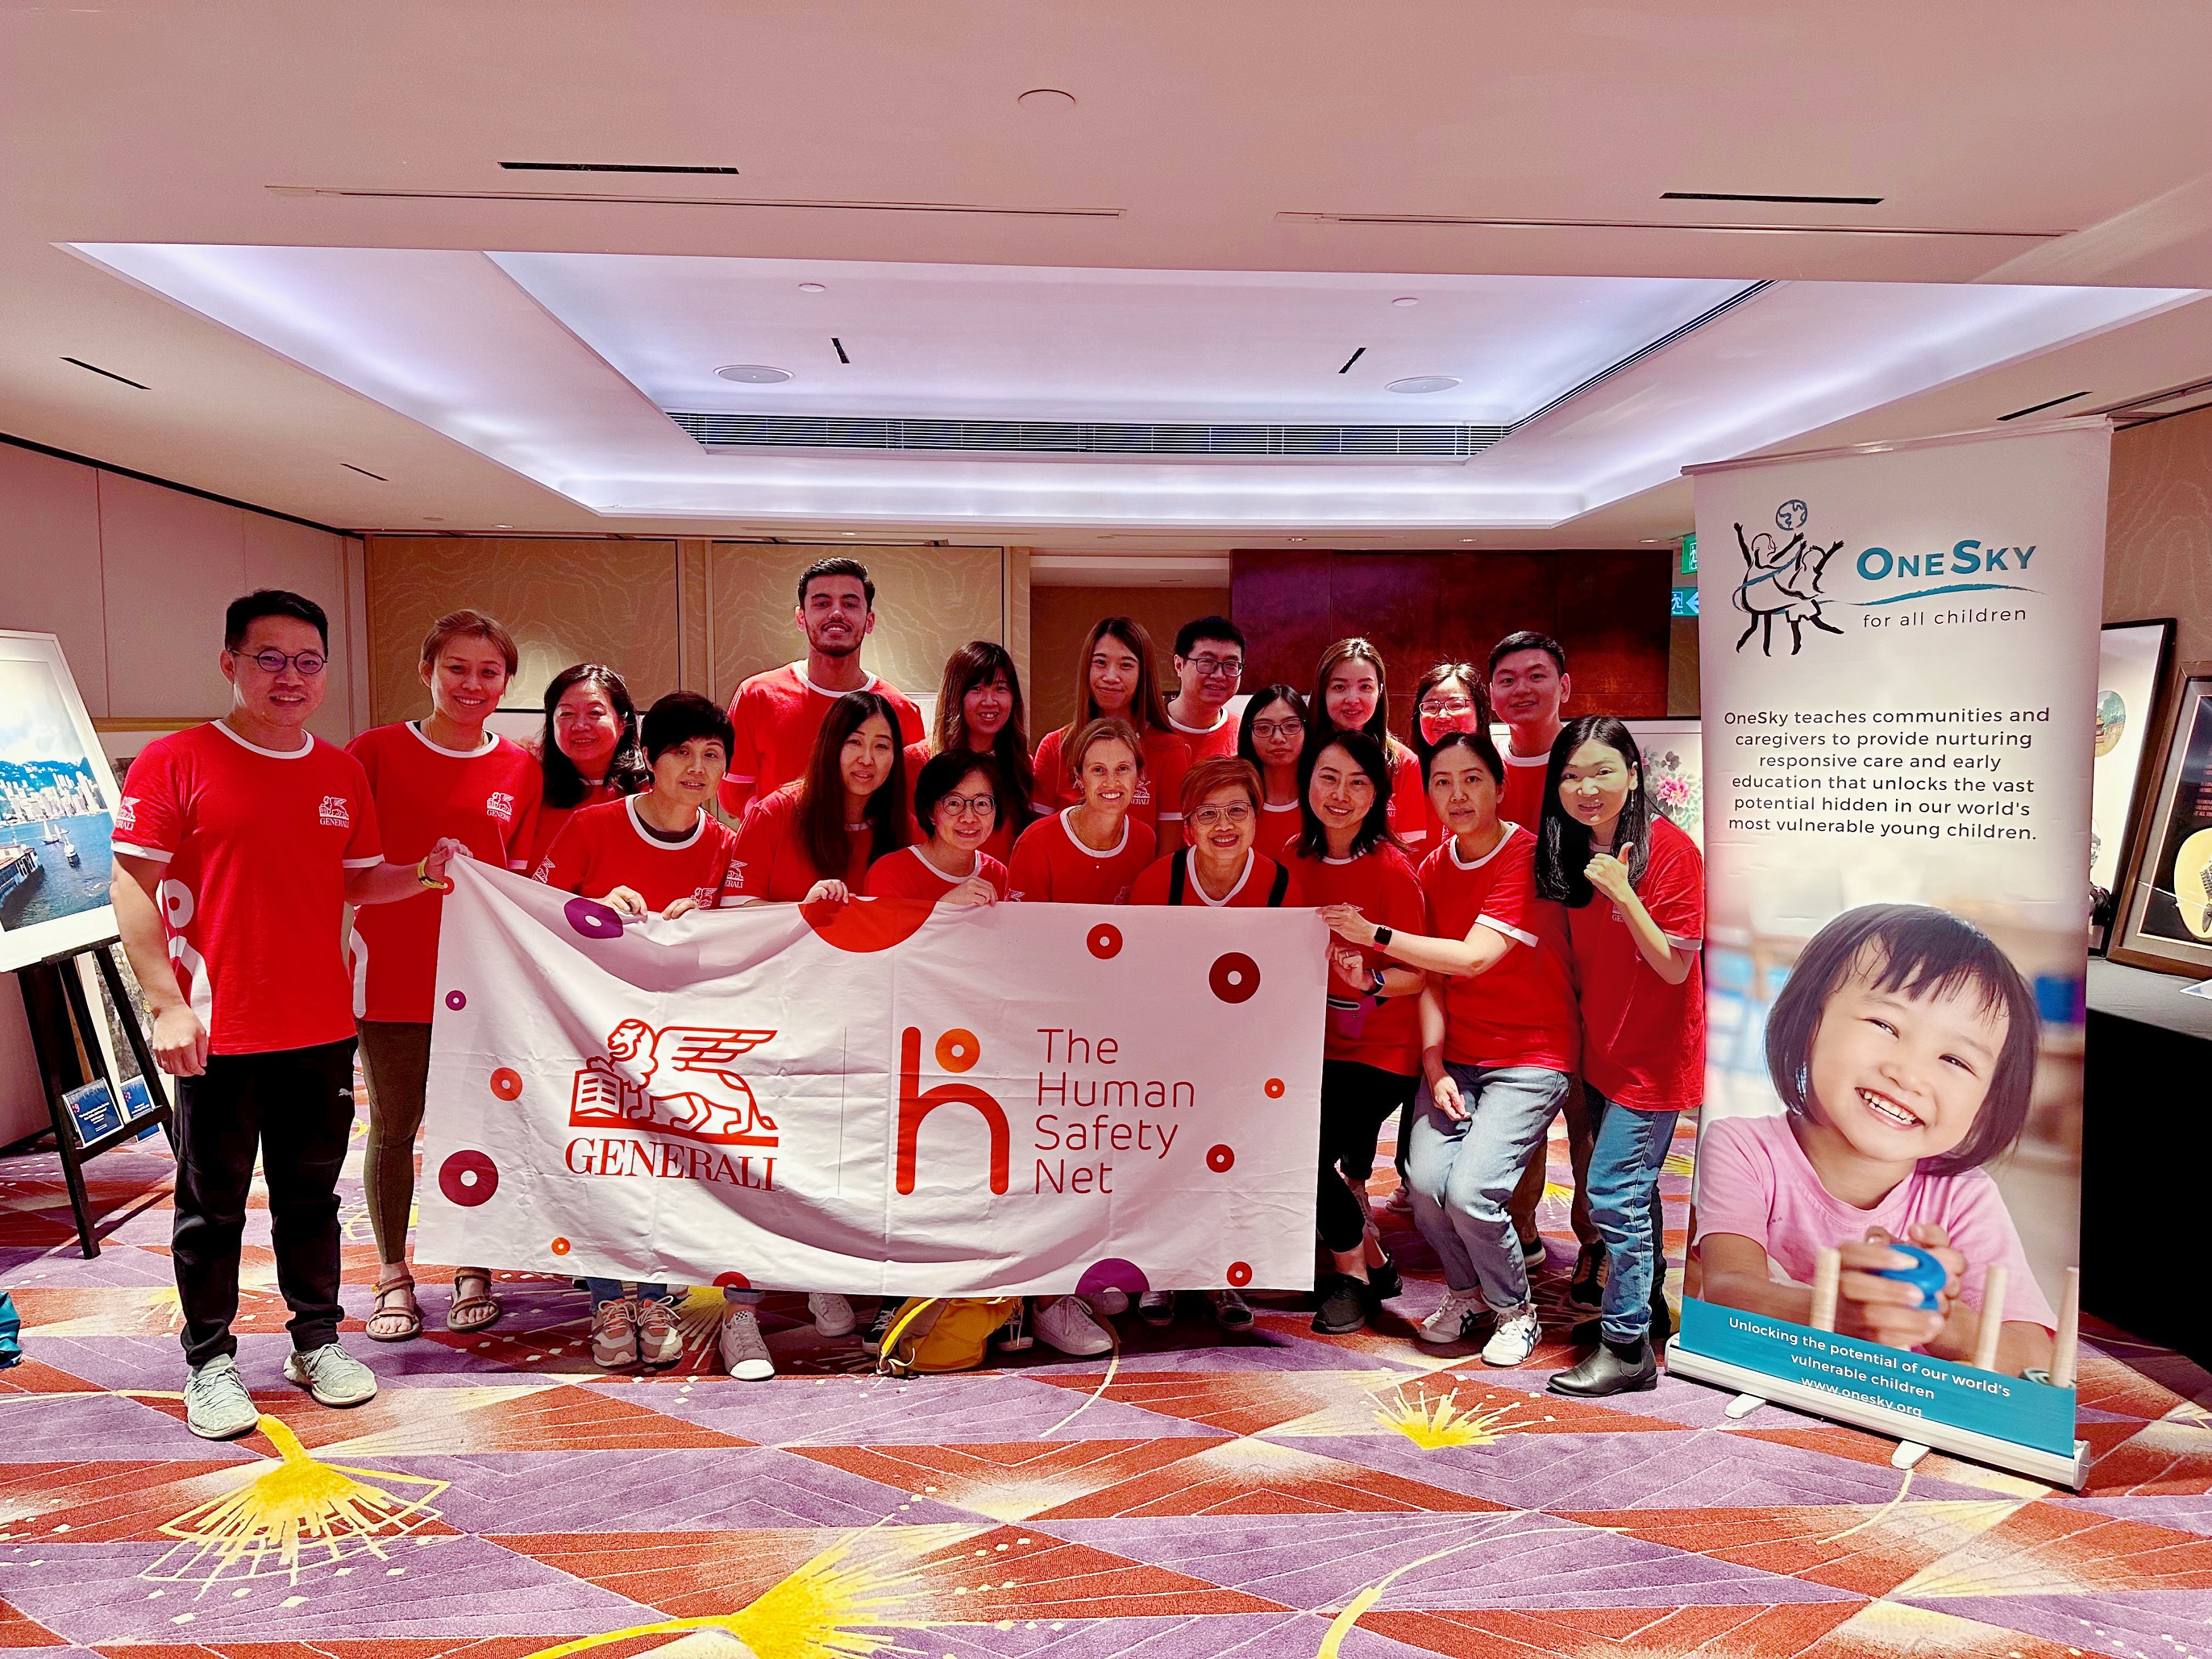 Generali Hong Kong supported OneSky in holding their first in-person fundraiser since 2019 to celebrate OneSky’s 25th anniversary, which successfully raised more than HK$5 million.